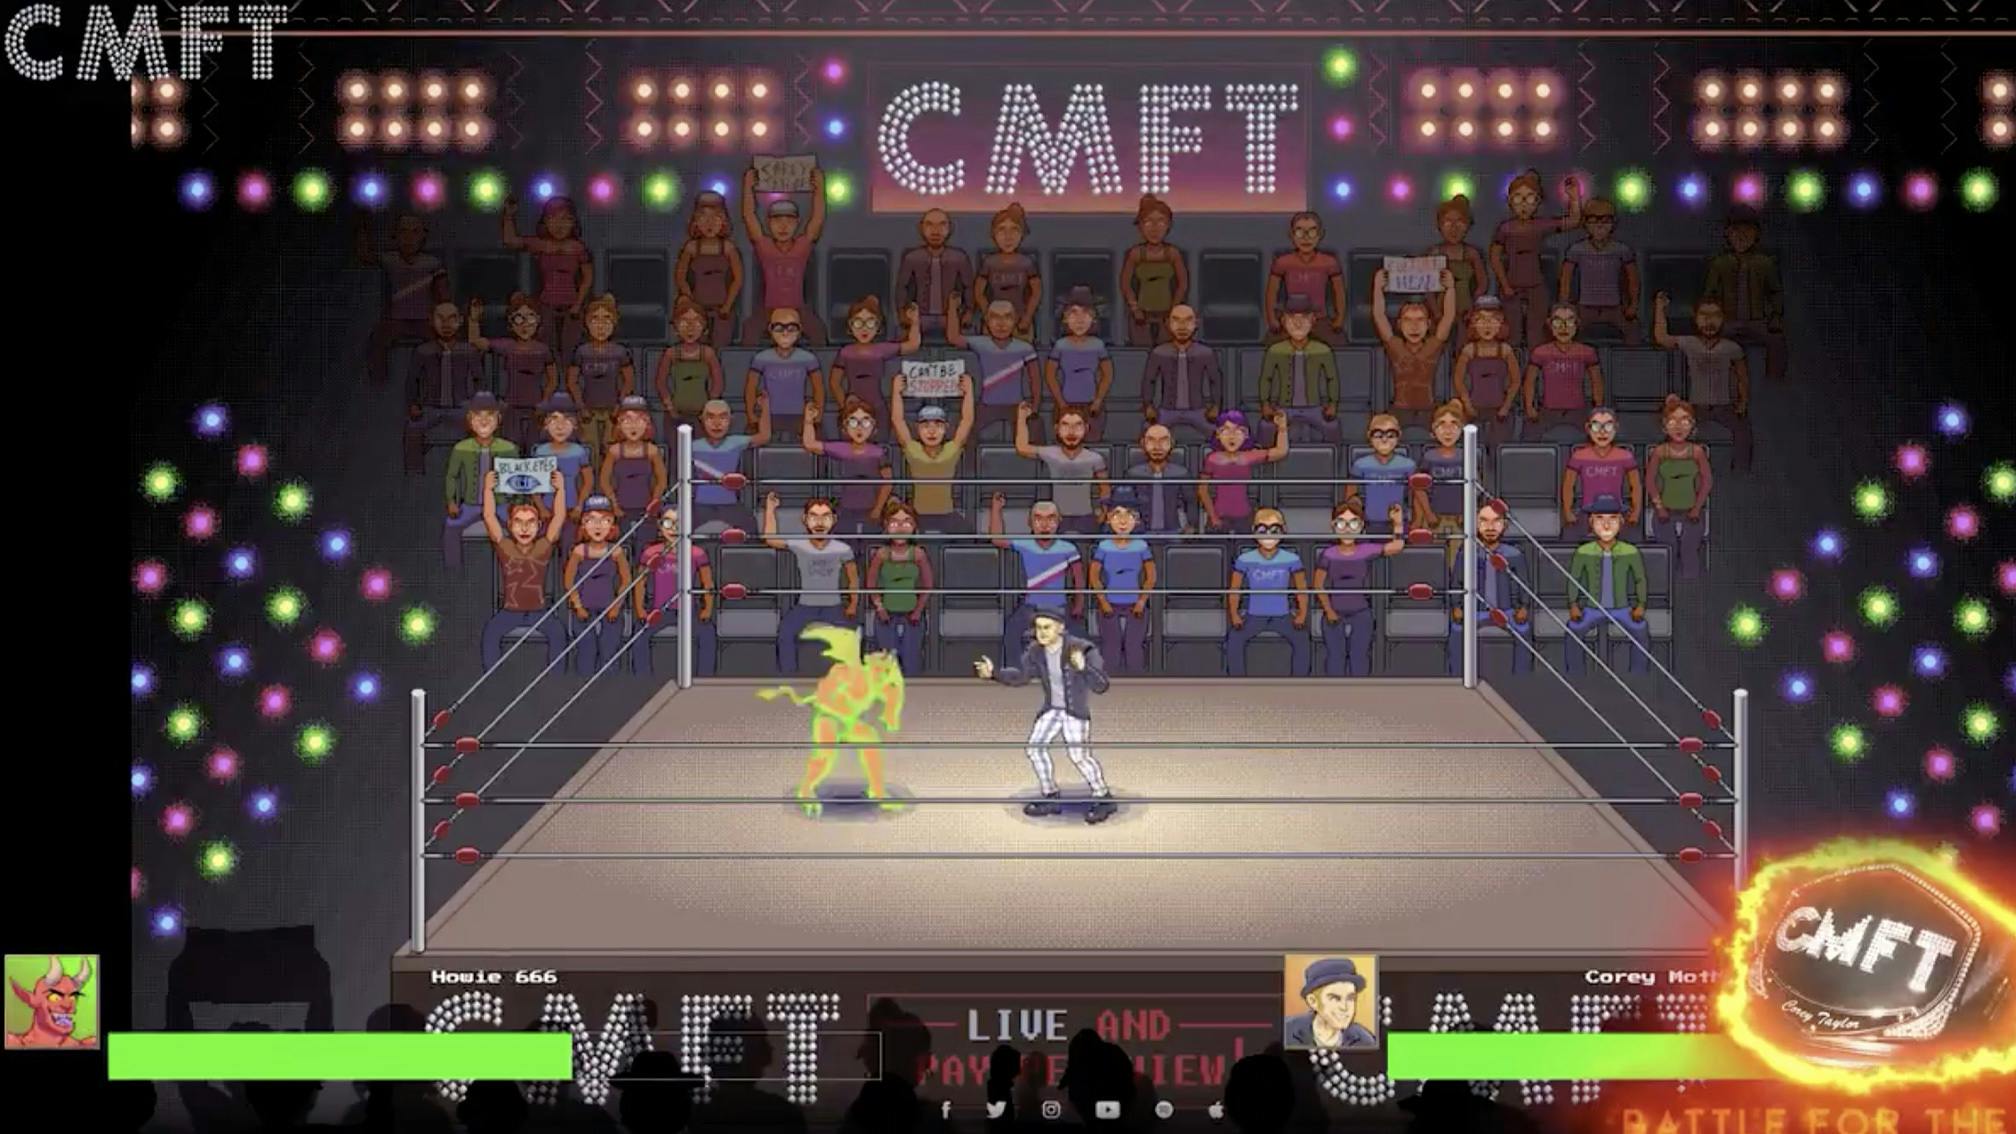 Corey Taylor Has Launched A CMFT Wrestling Video Game